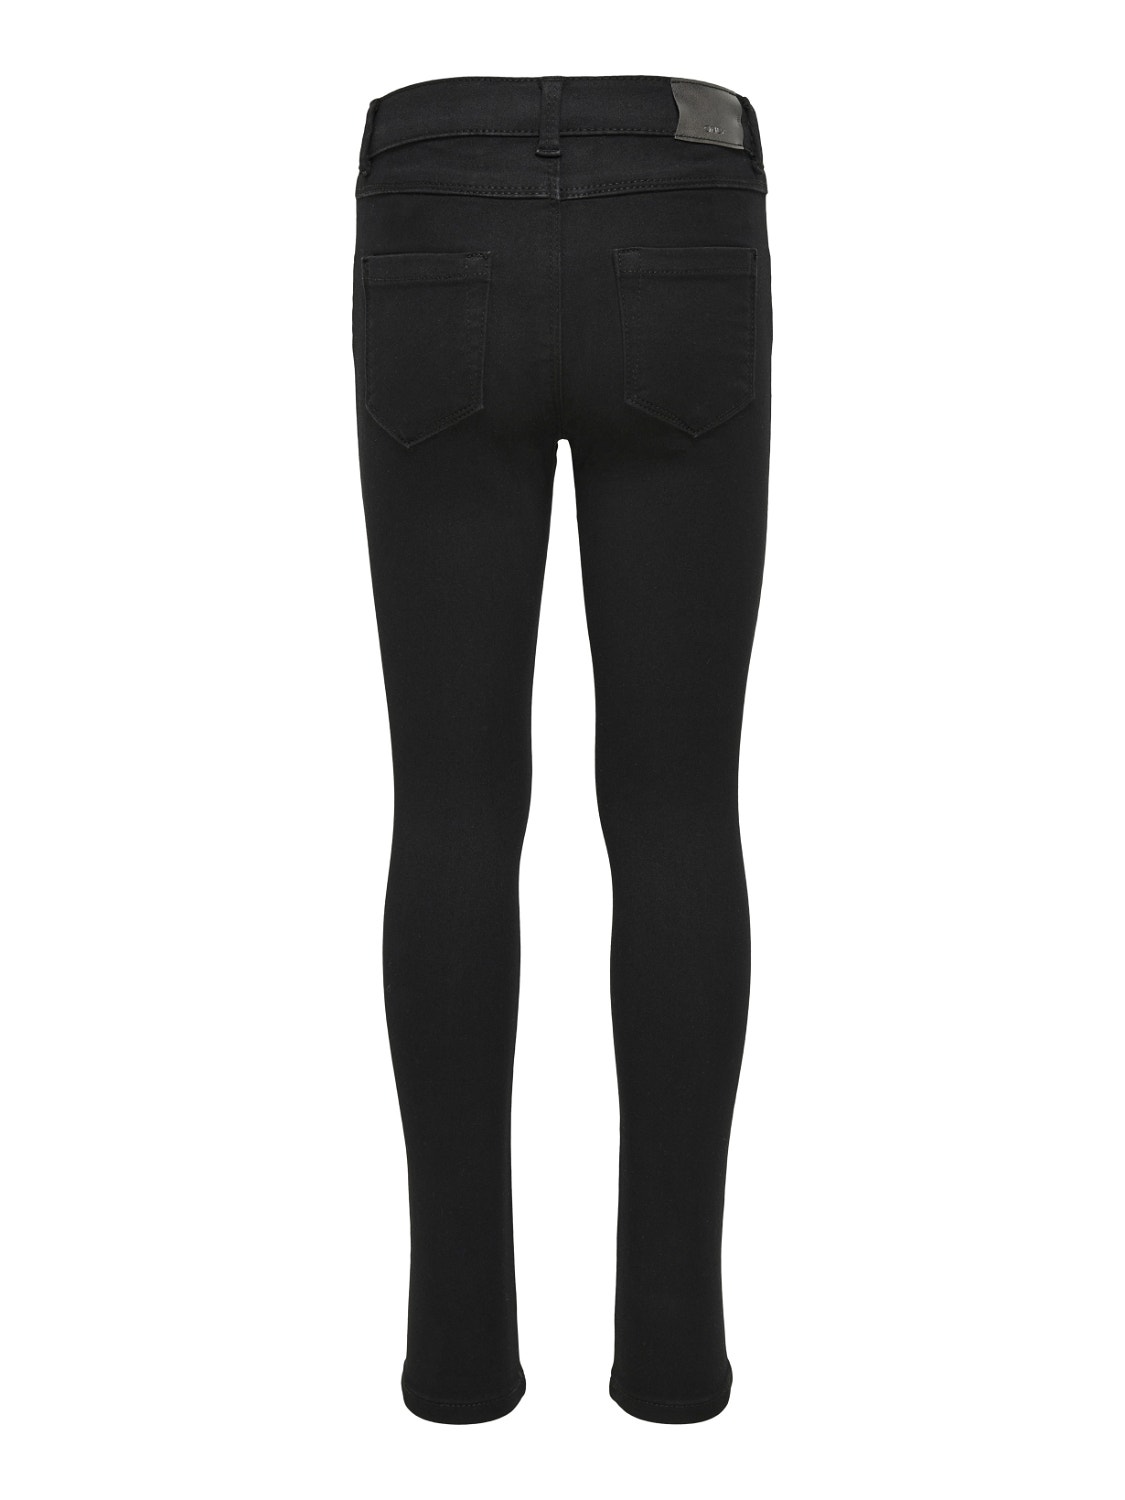 ONLY Skinny Fit Jeans -Black - 15234567